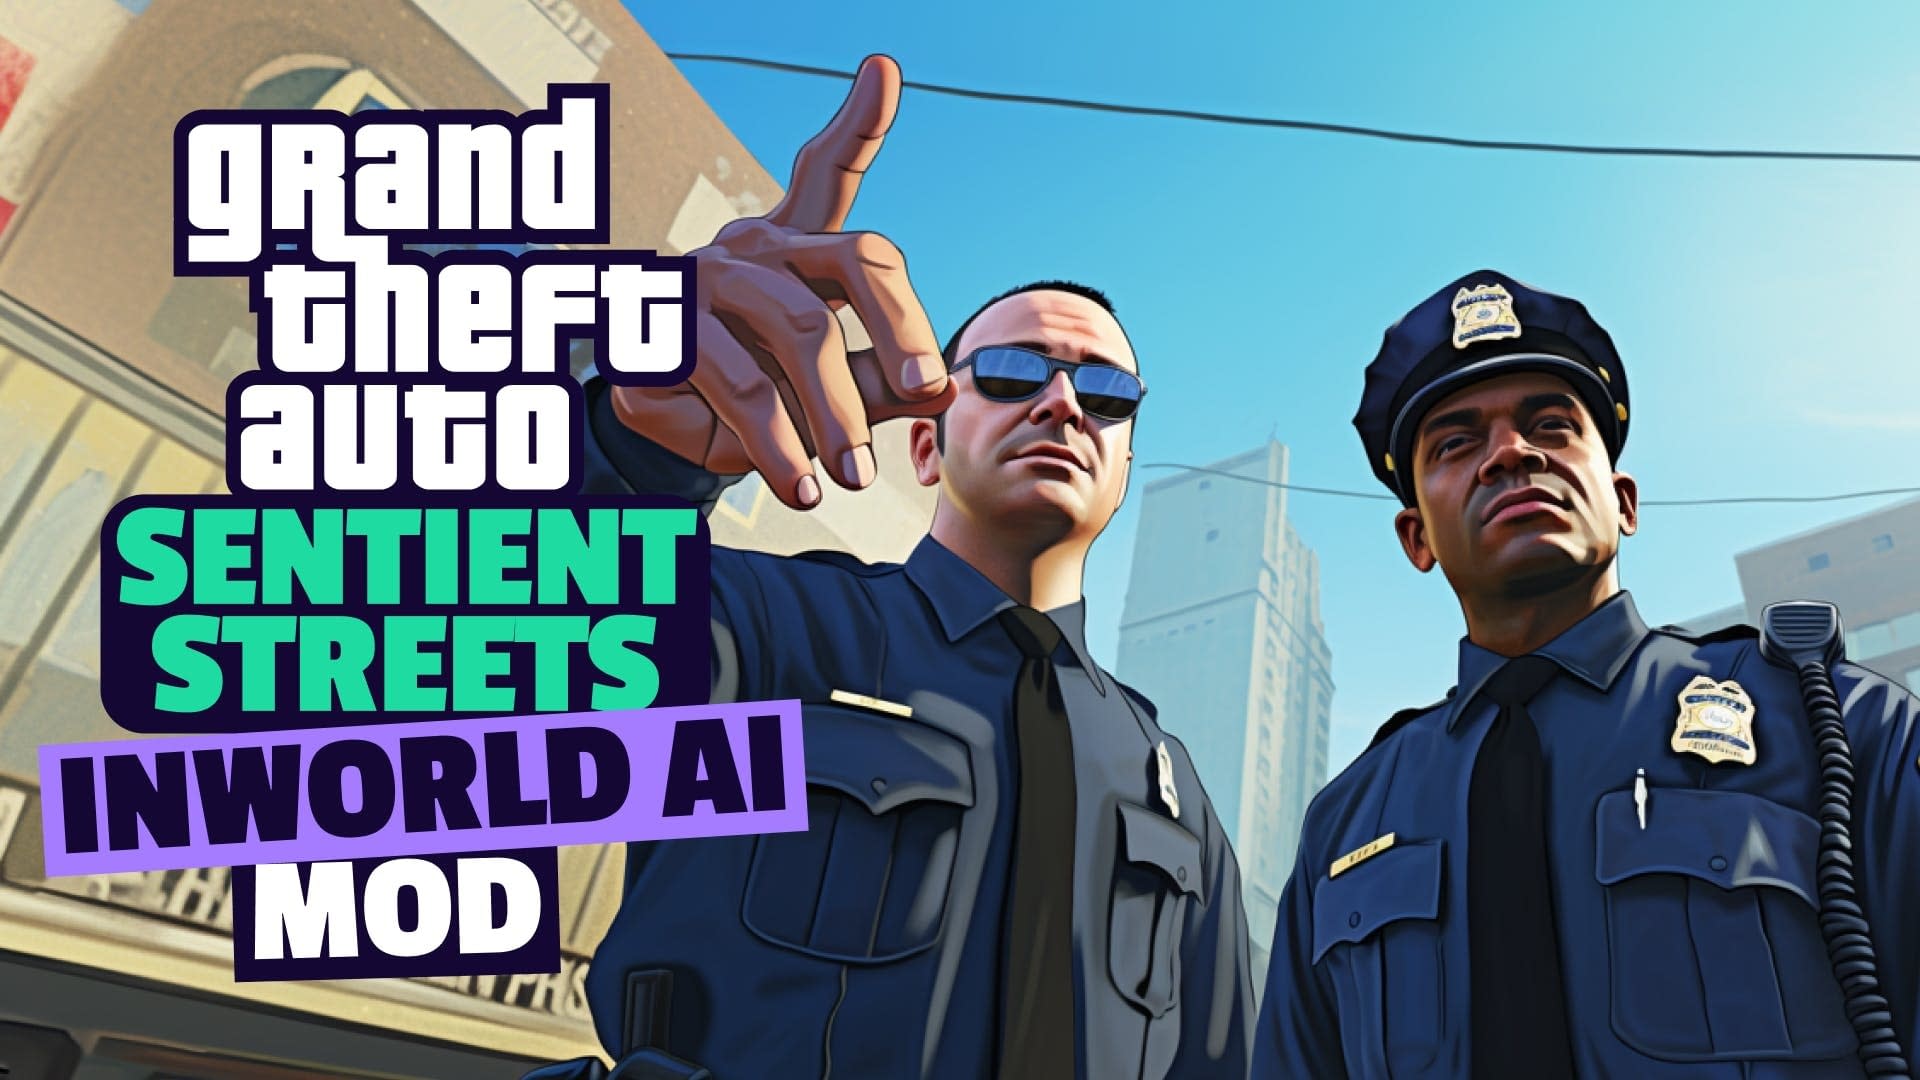 Take-Two Prohibited AI Supported Mode released for GTA 5!